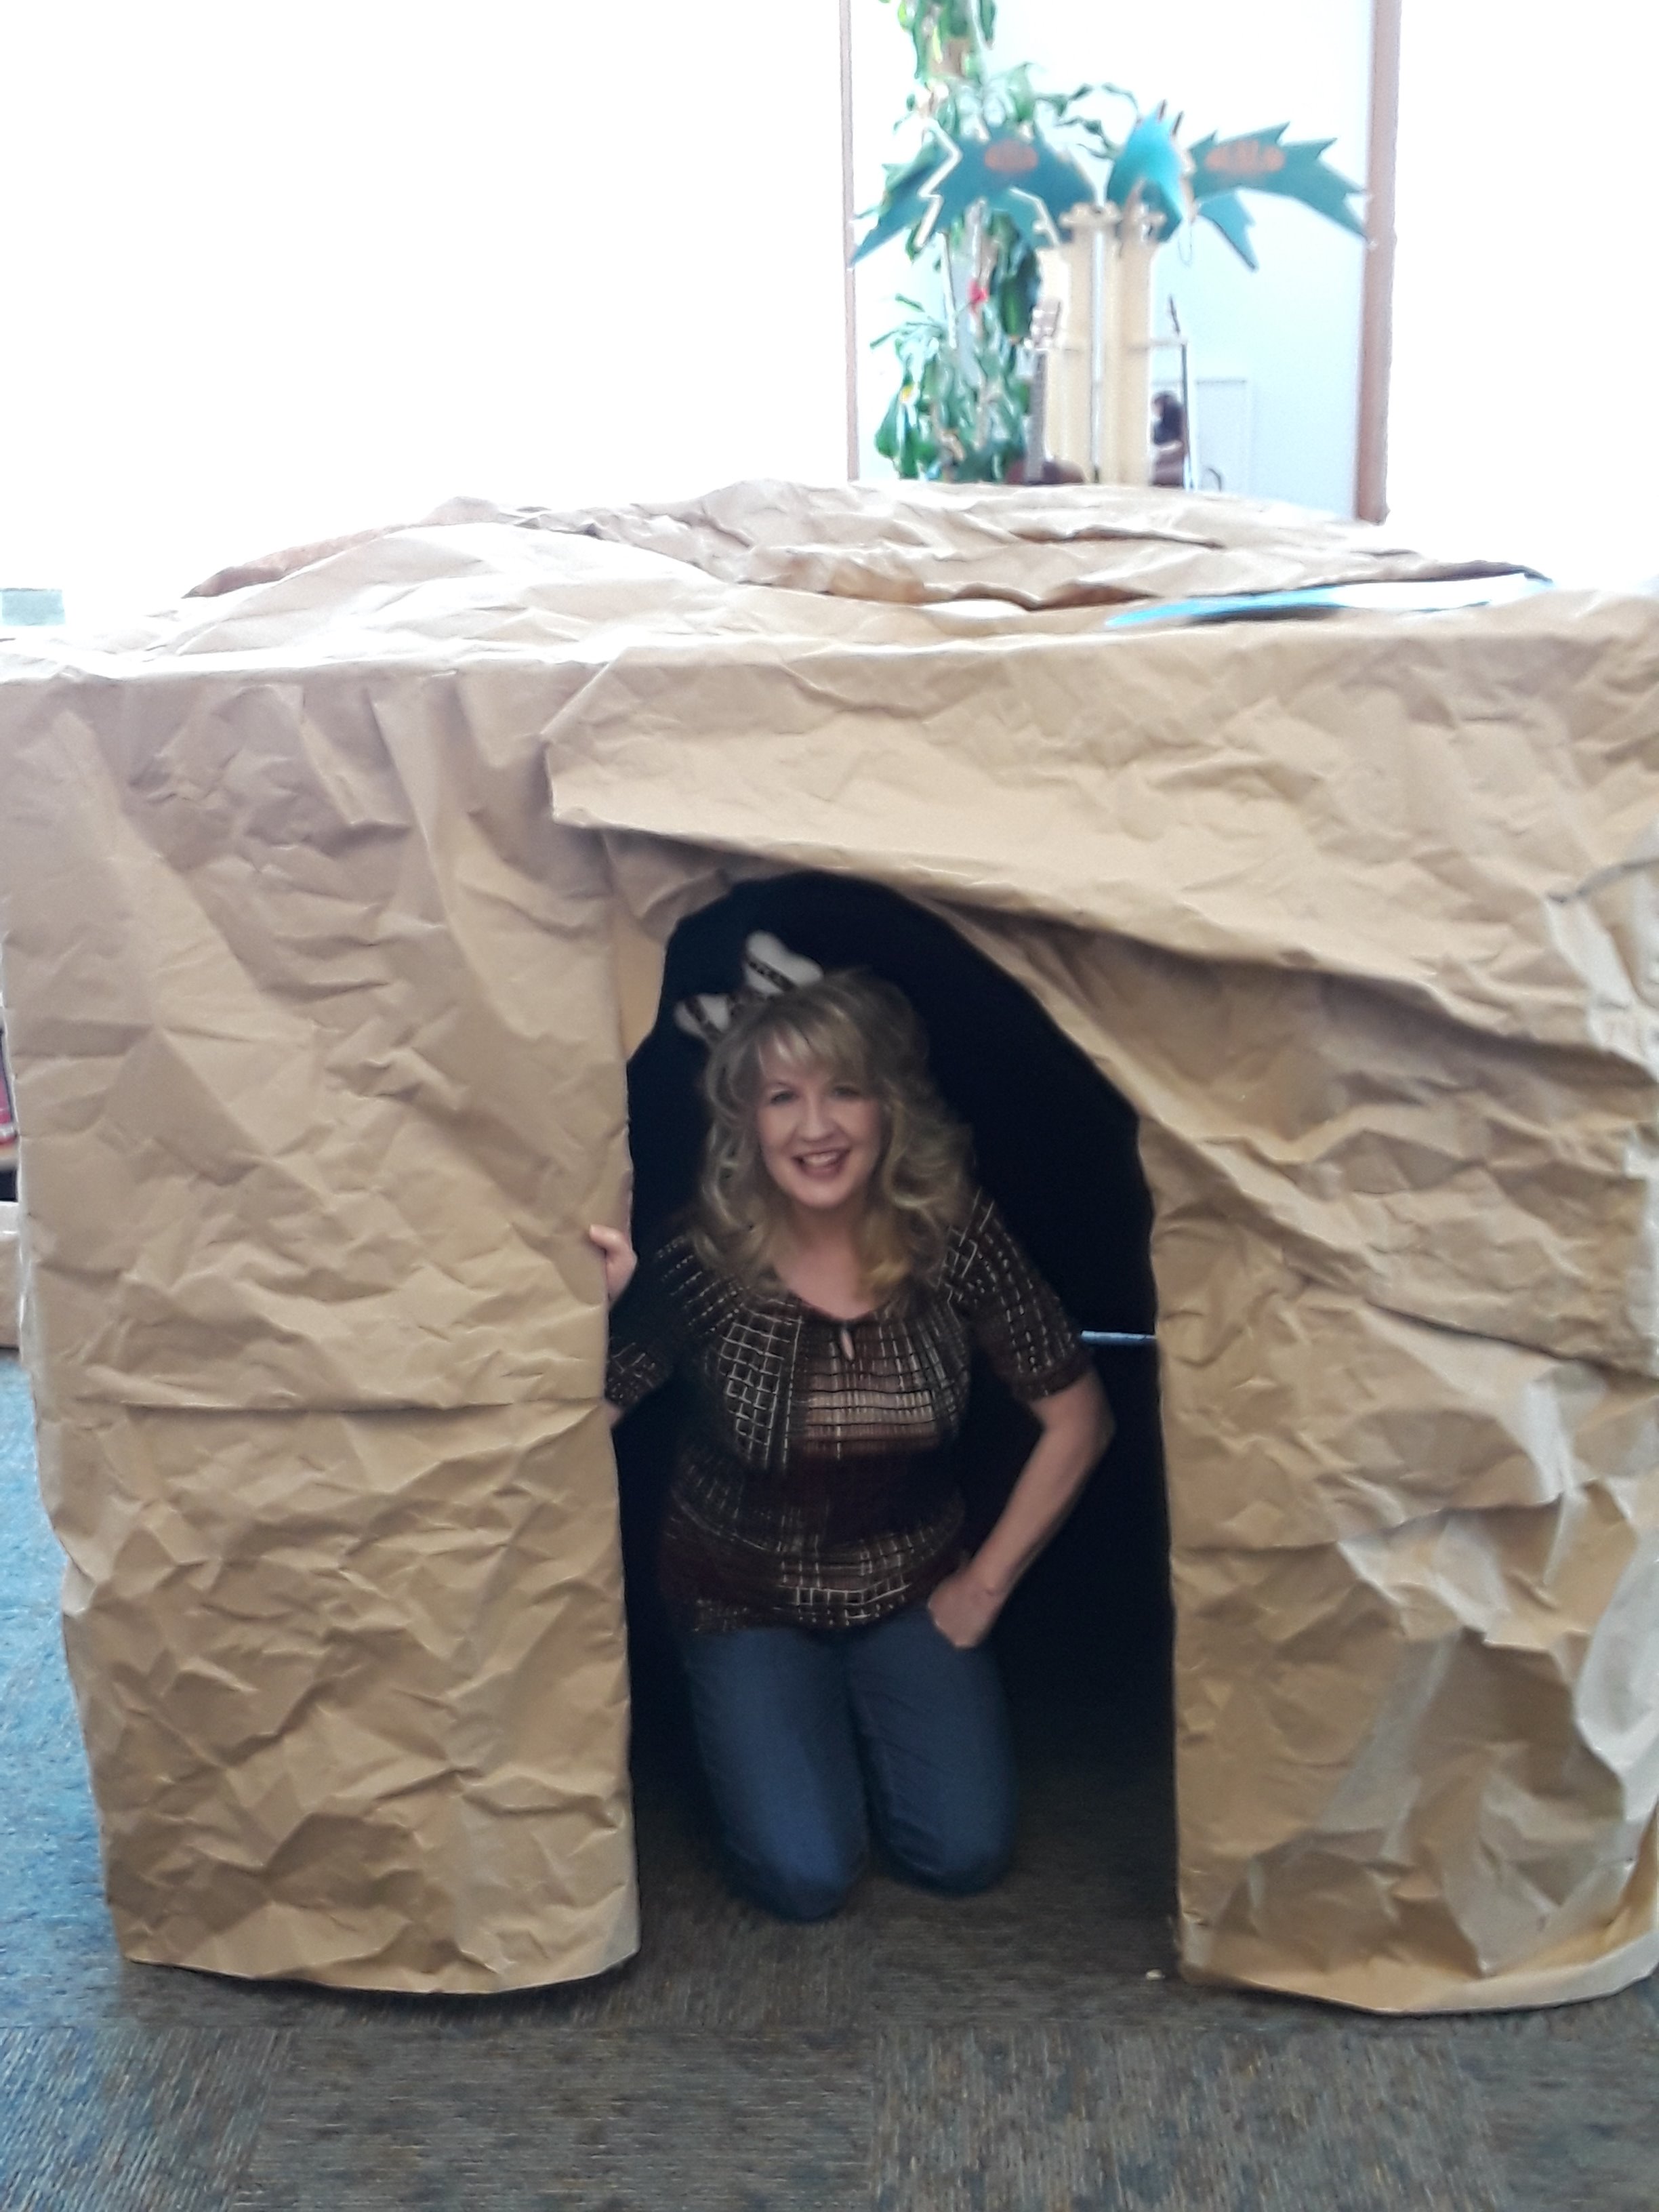 Cathy Breisacher on X: ⭐️Giveaway! It's summer & kids have time to use  their imagination to make something out of a box, just like my CAVEKIDS.  Here's a CHANCE to WIN CAVEKID